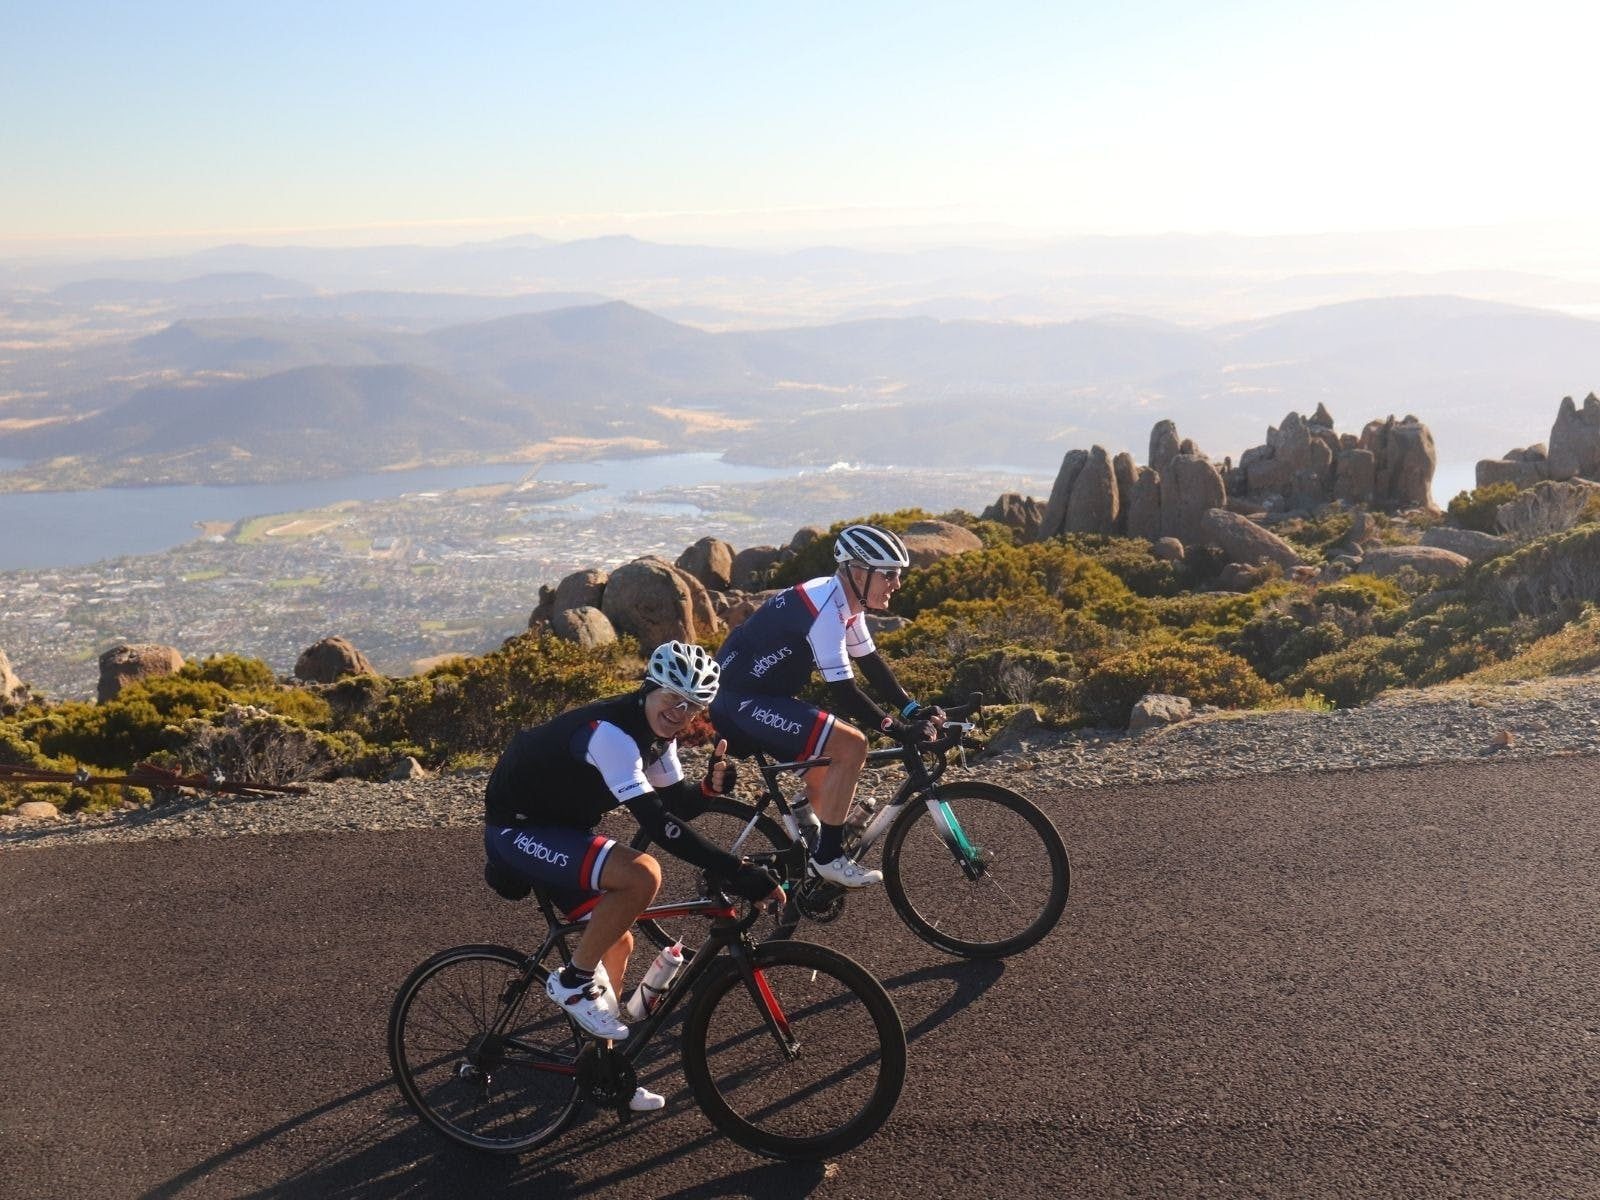 2 cyclists on bikes smiling at camera with backdrop of the city of Hobart behind them